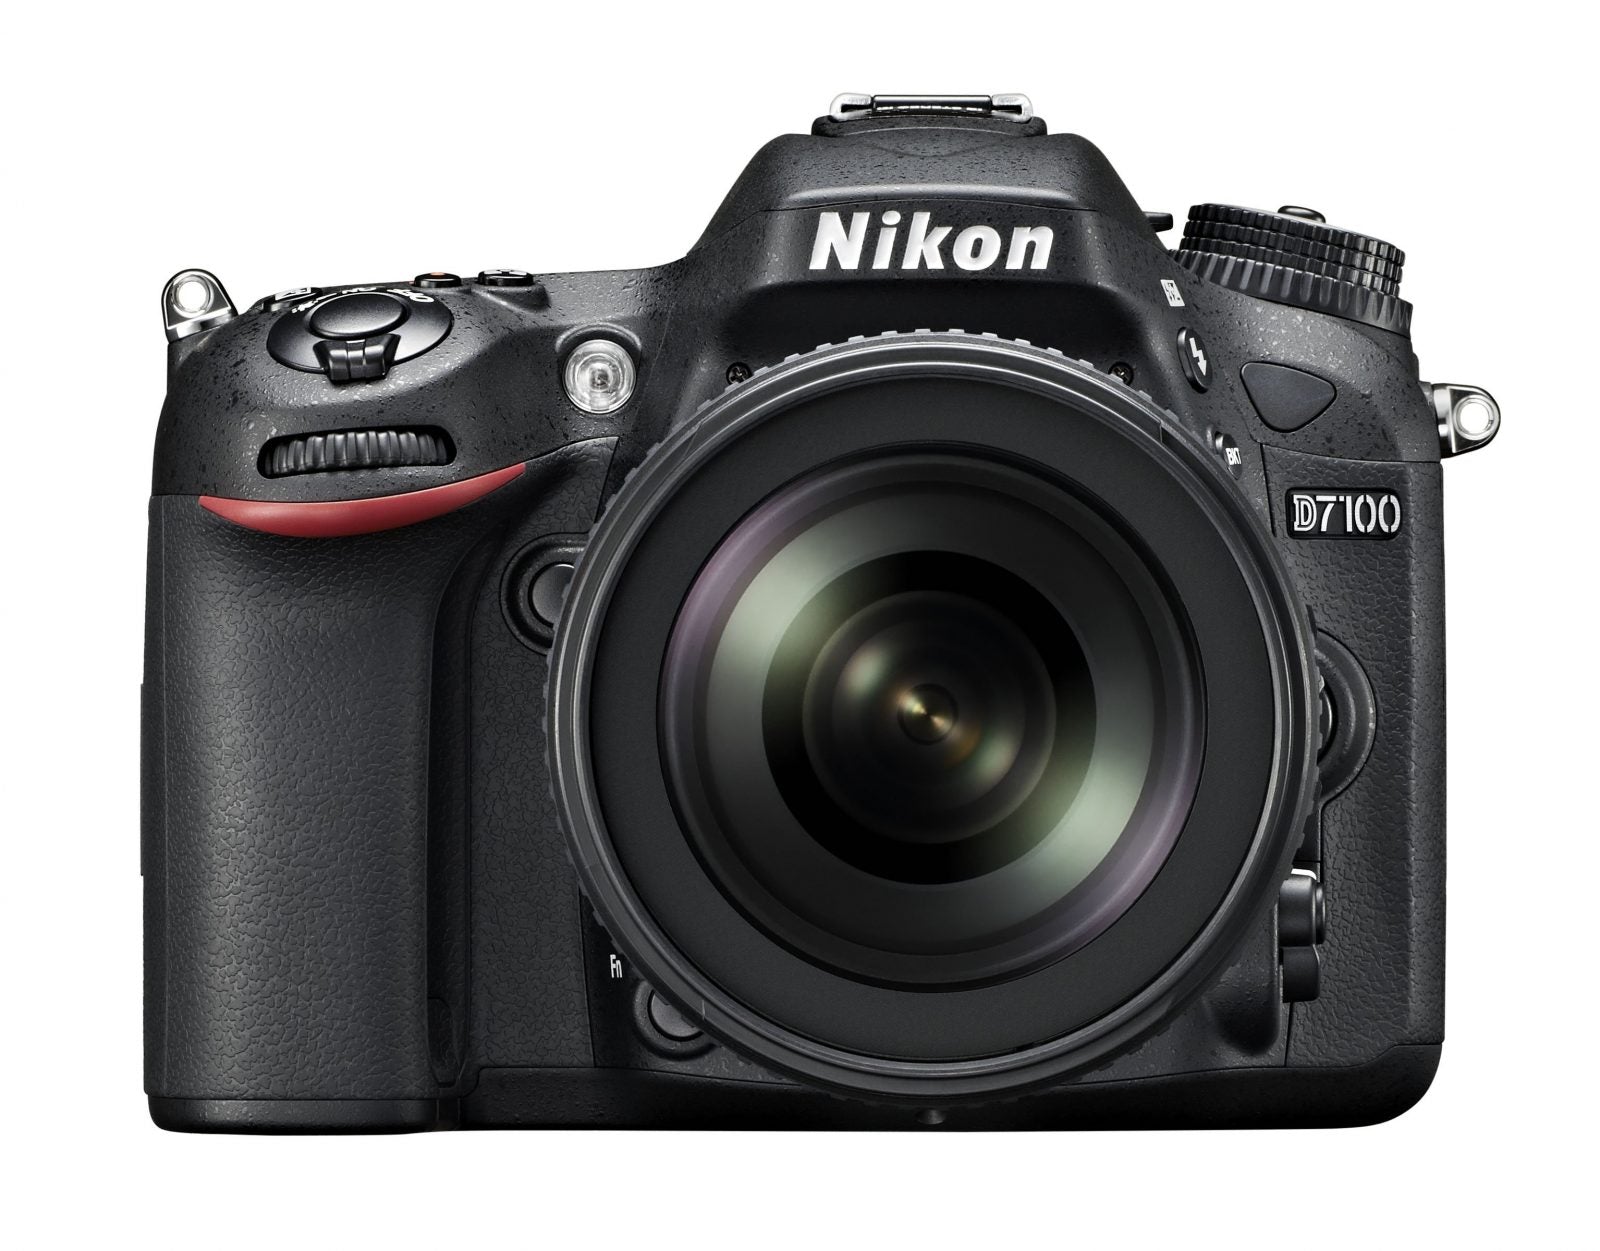 Introducing the Nikon D7100: Agility, Amazing Image Quality, and Wirel